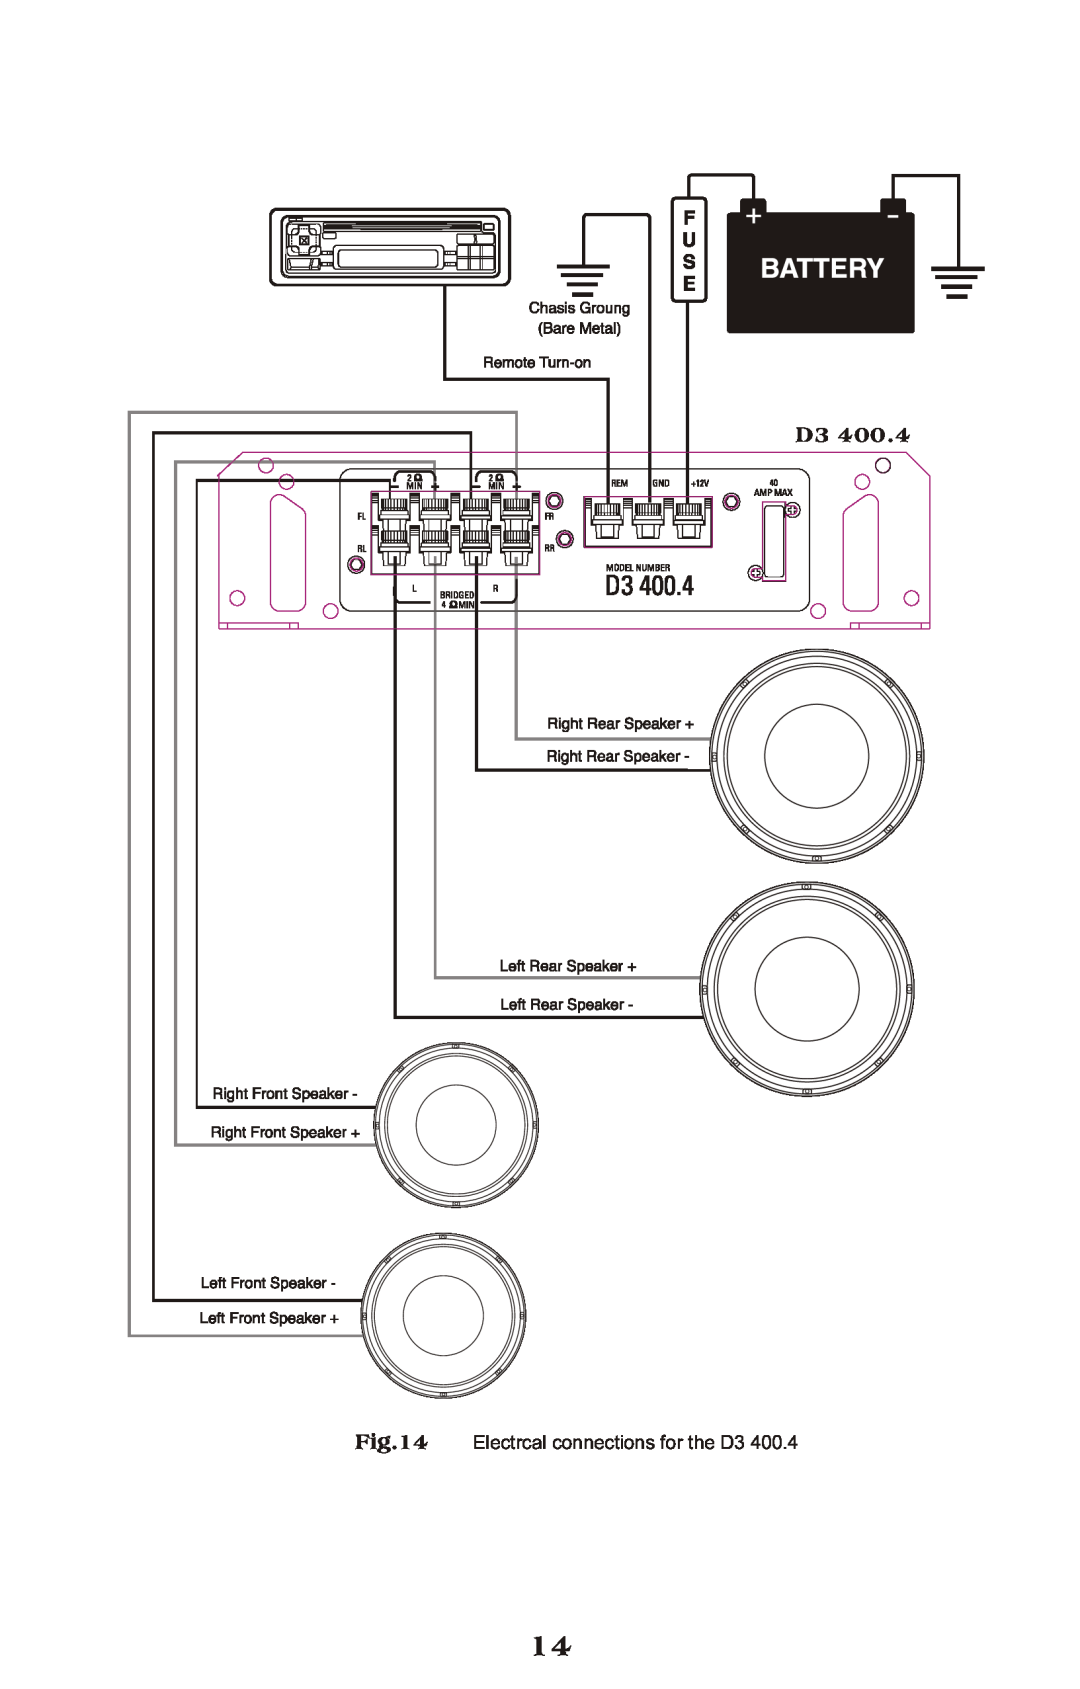 Diamond Audio Technology D3 Series specifications Electrcal connections for the D3 